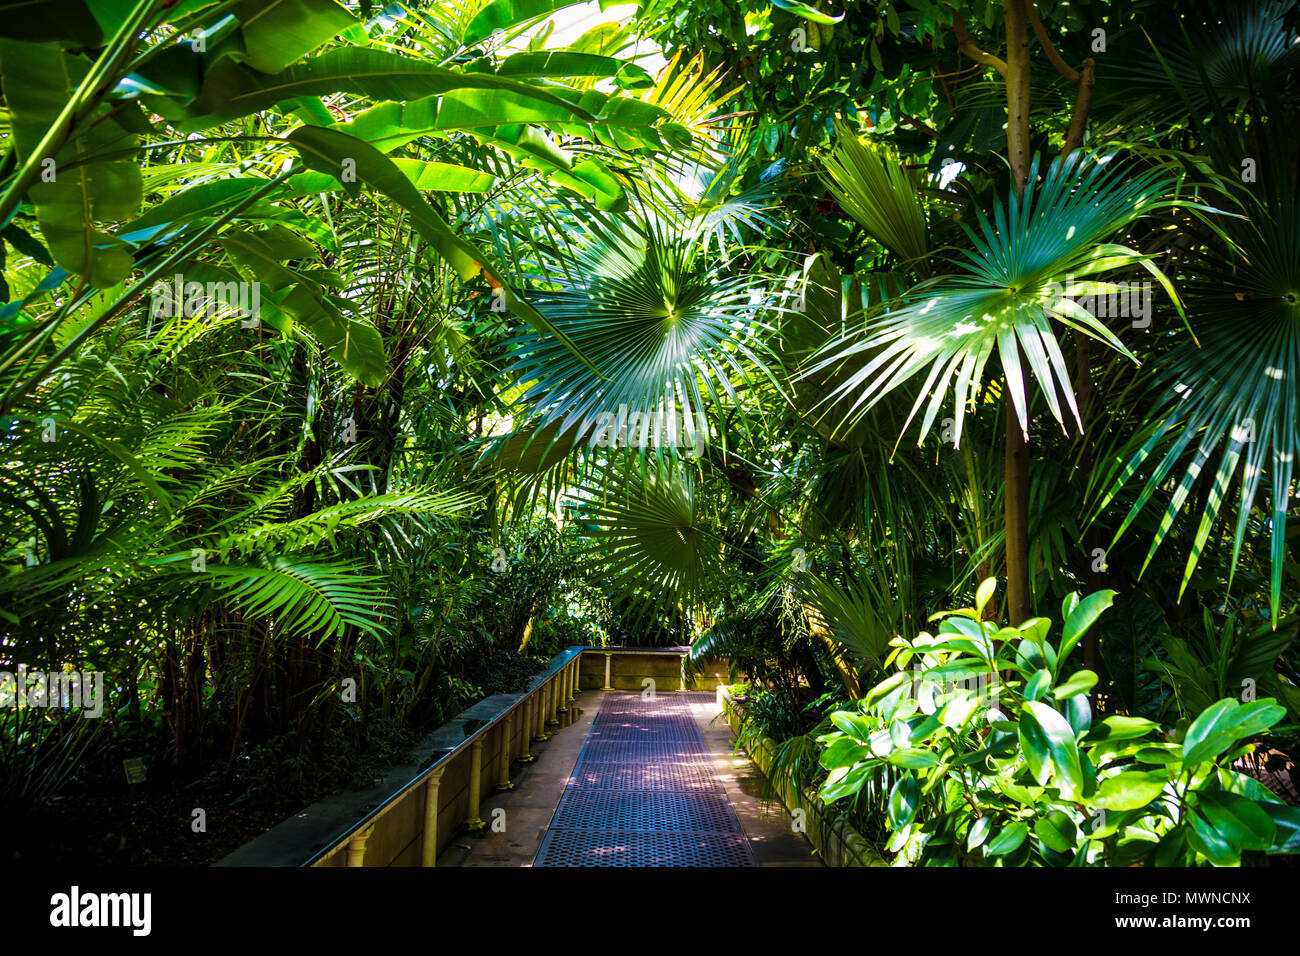 Inside the Palm House at Kew Gardens - London, England Stock Photo